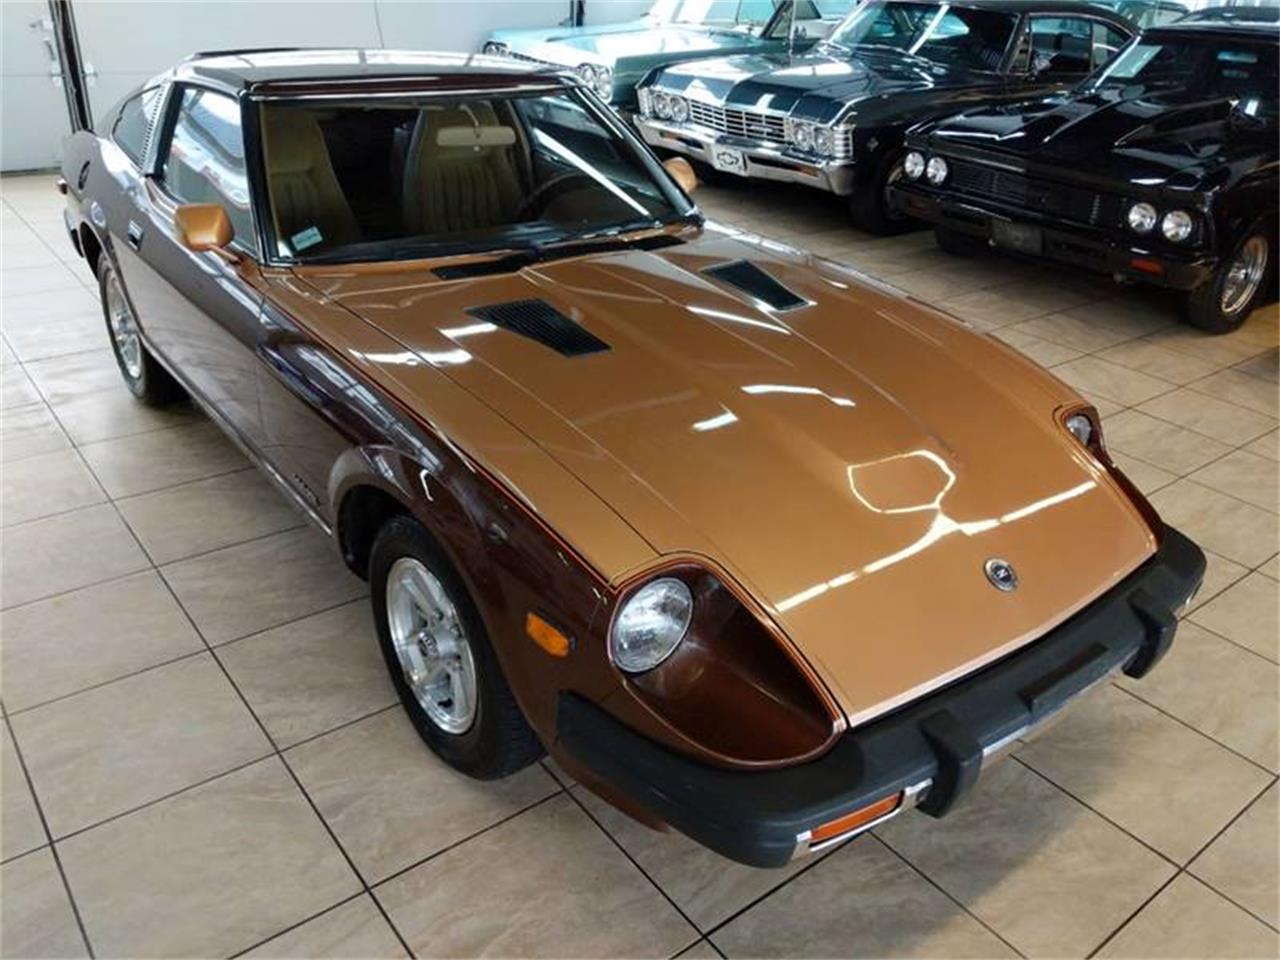 1979 Datsun 280ZX for sale in St. Charles, IL – photo 85